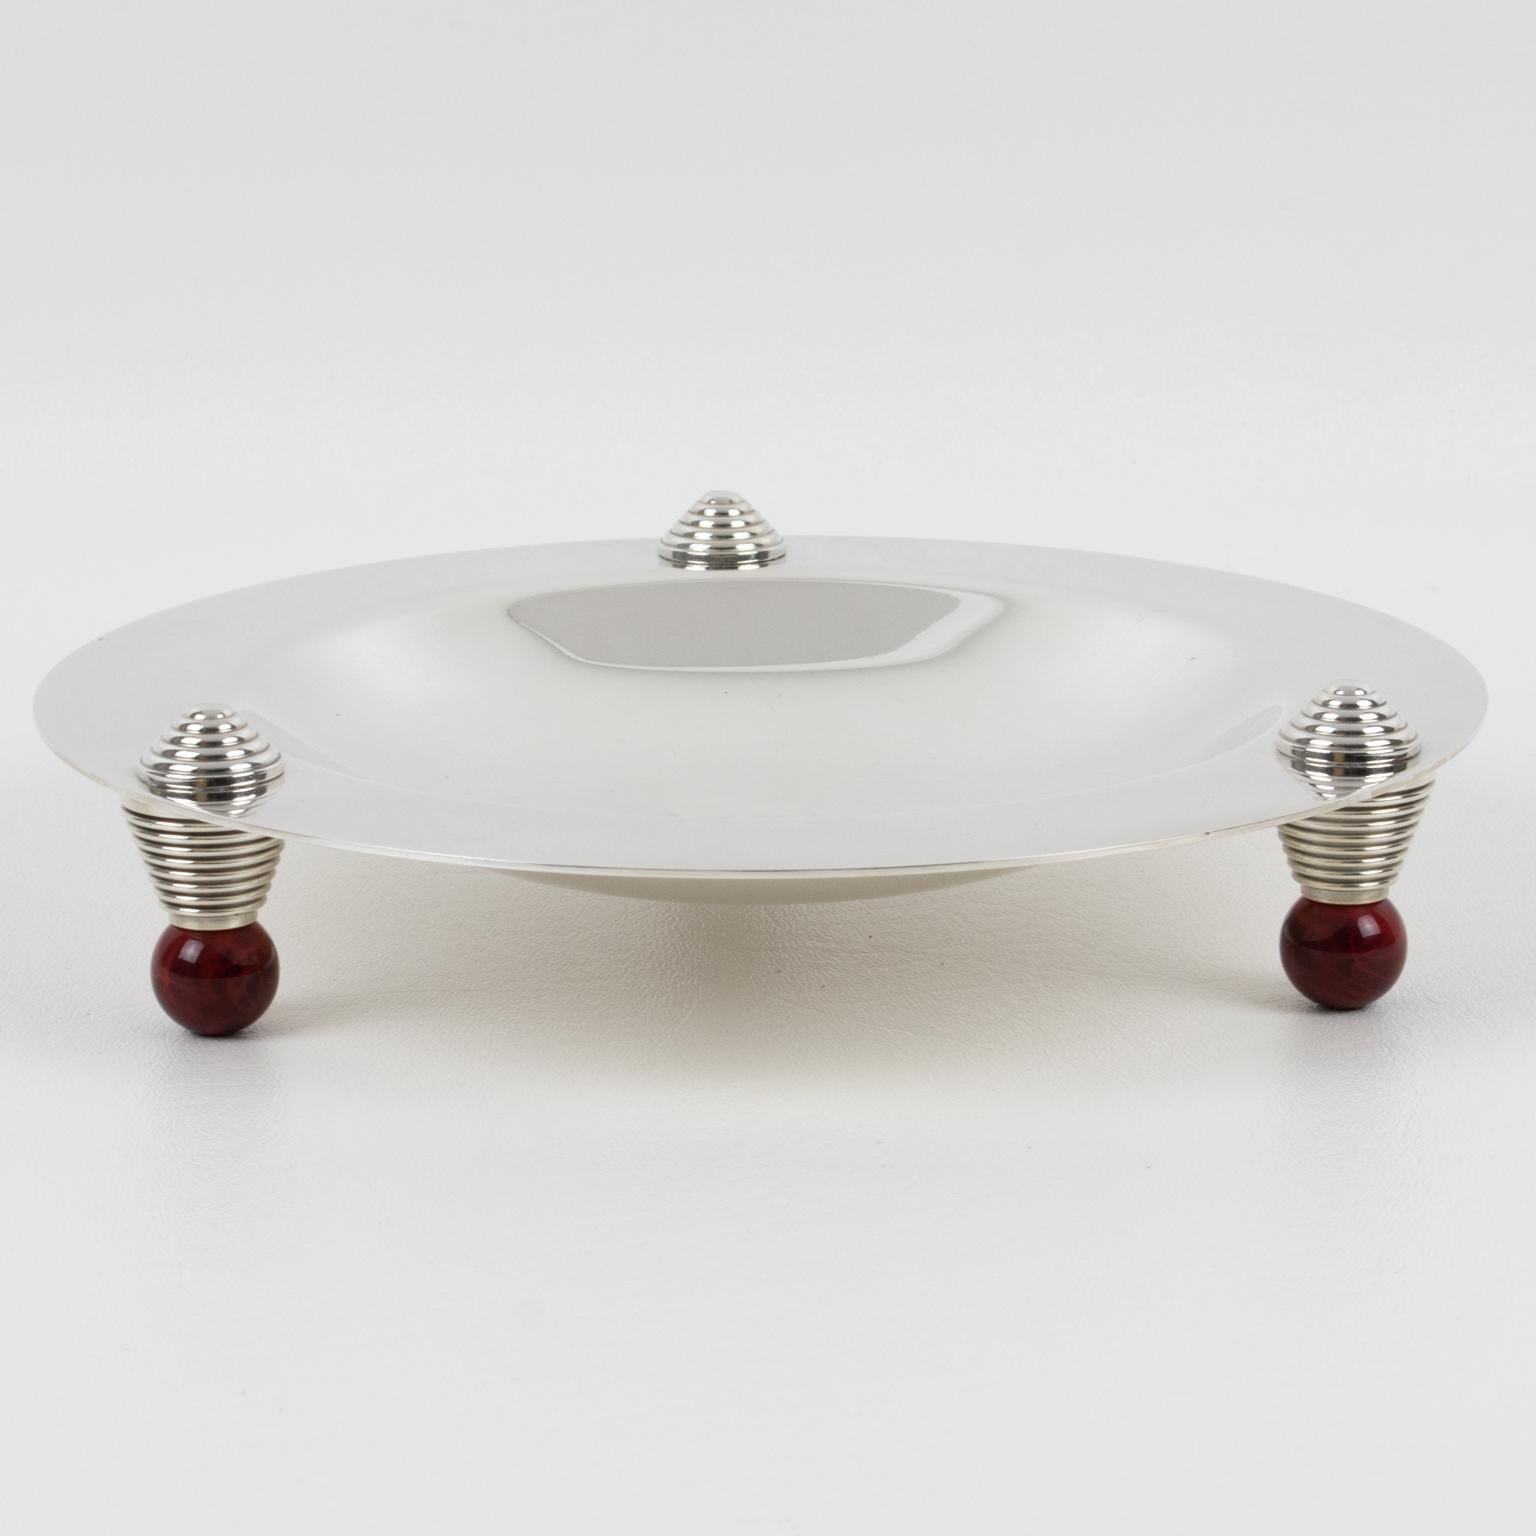 A sophisticated Art Deco style silver plate coupe, ring holder, bowl, or centerpiece designed by Puiforcat, France. Jean Puiforcat created this elegant piece in the 1930s, the Art Deco period. Puiforcat France continues editing this collection until